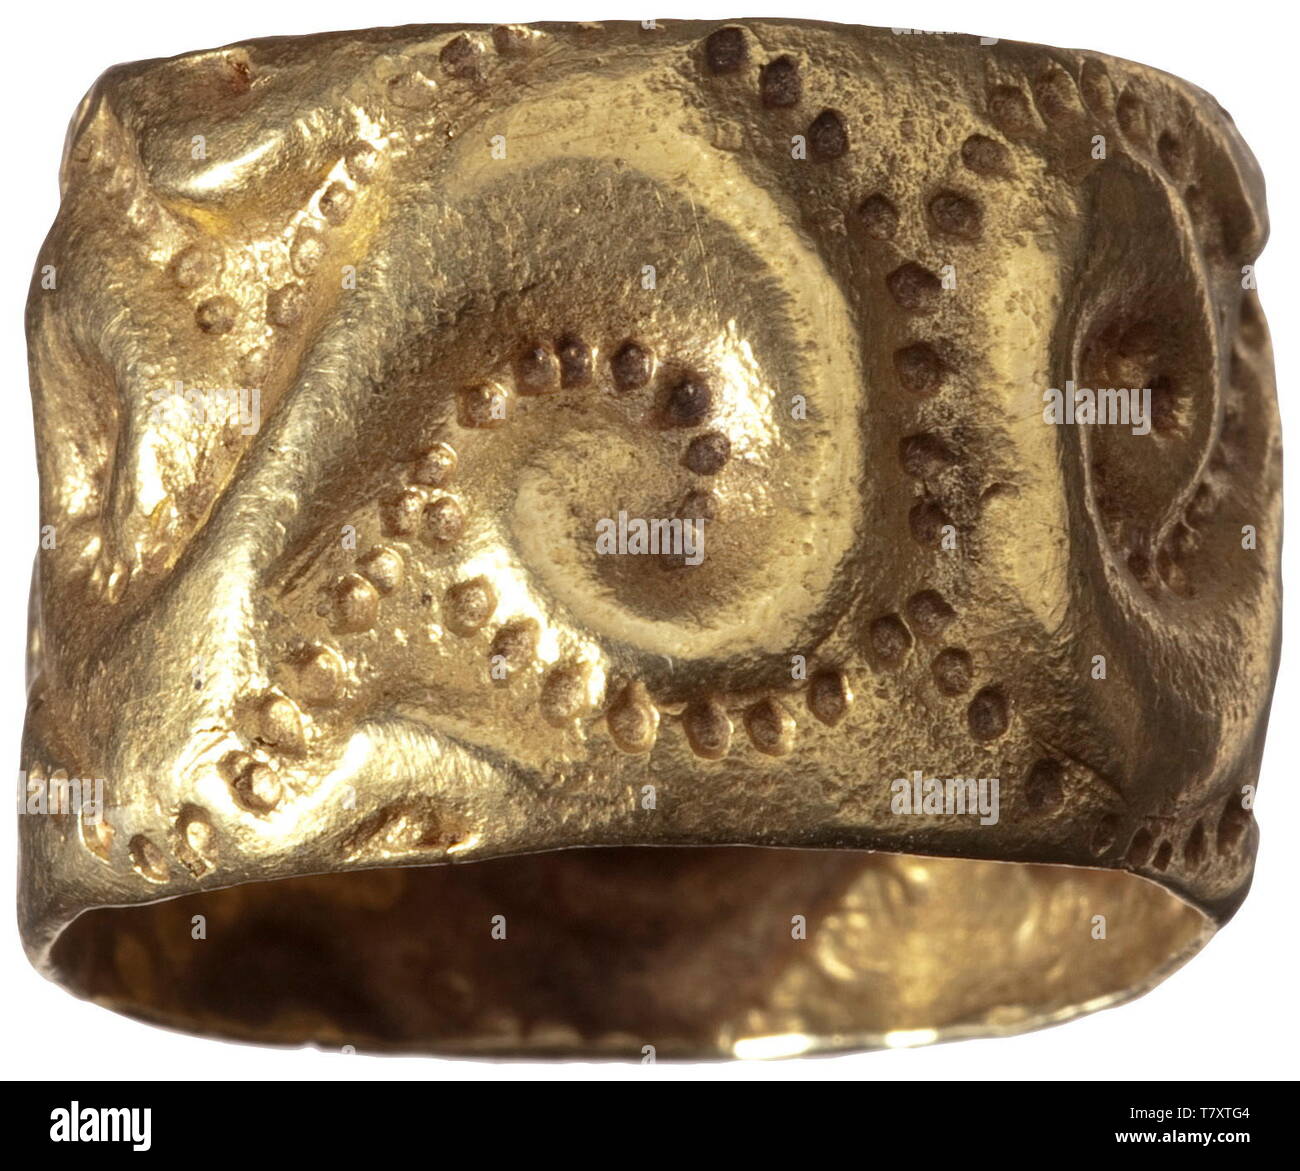 A Celtic gold ring, 4th/3rd century BC. Broad finger ring with chased and punched decorations. Weight 9 g. Provenance: German private collection, 1980s. historic, historical, ancient world, Additional-Rights-Clearance-Info-Not-Available Stock Photo